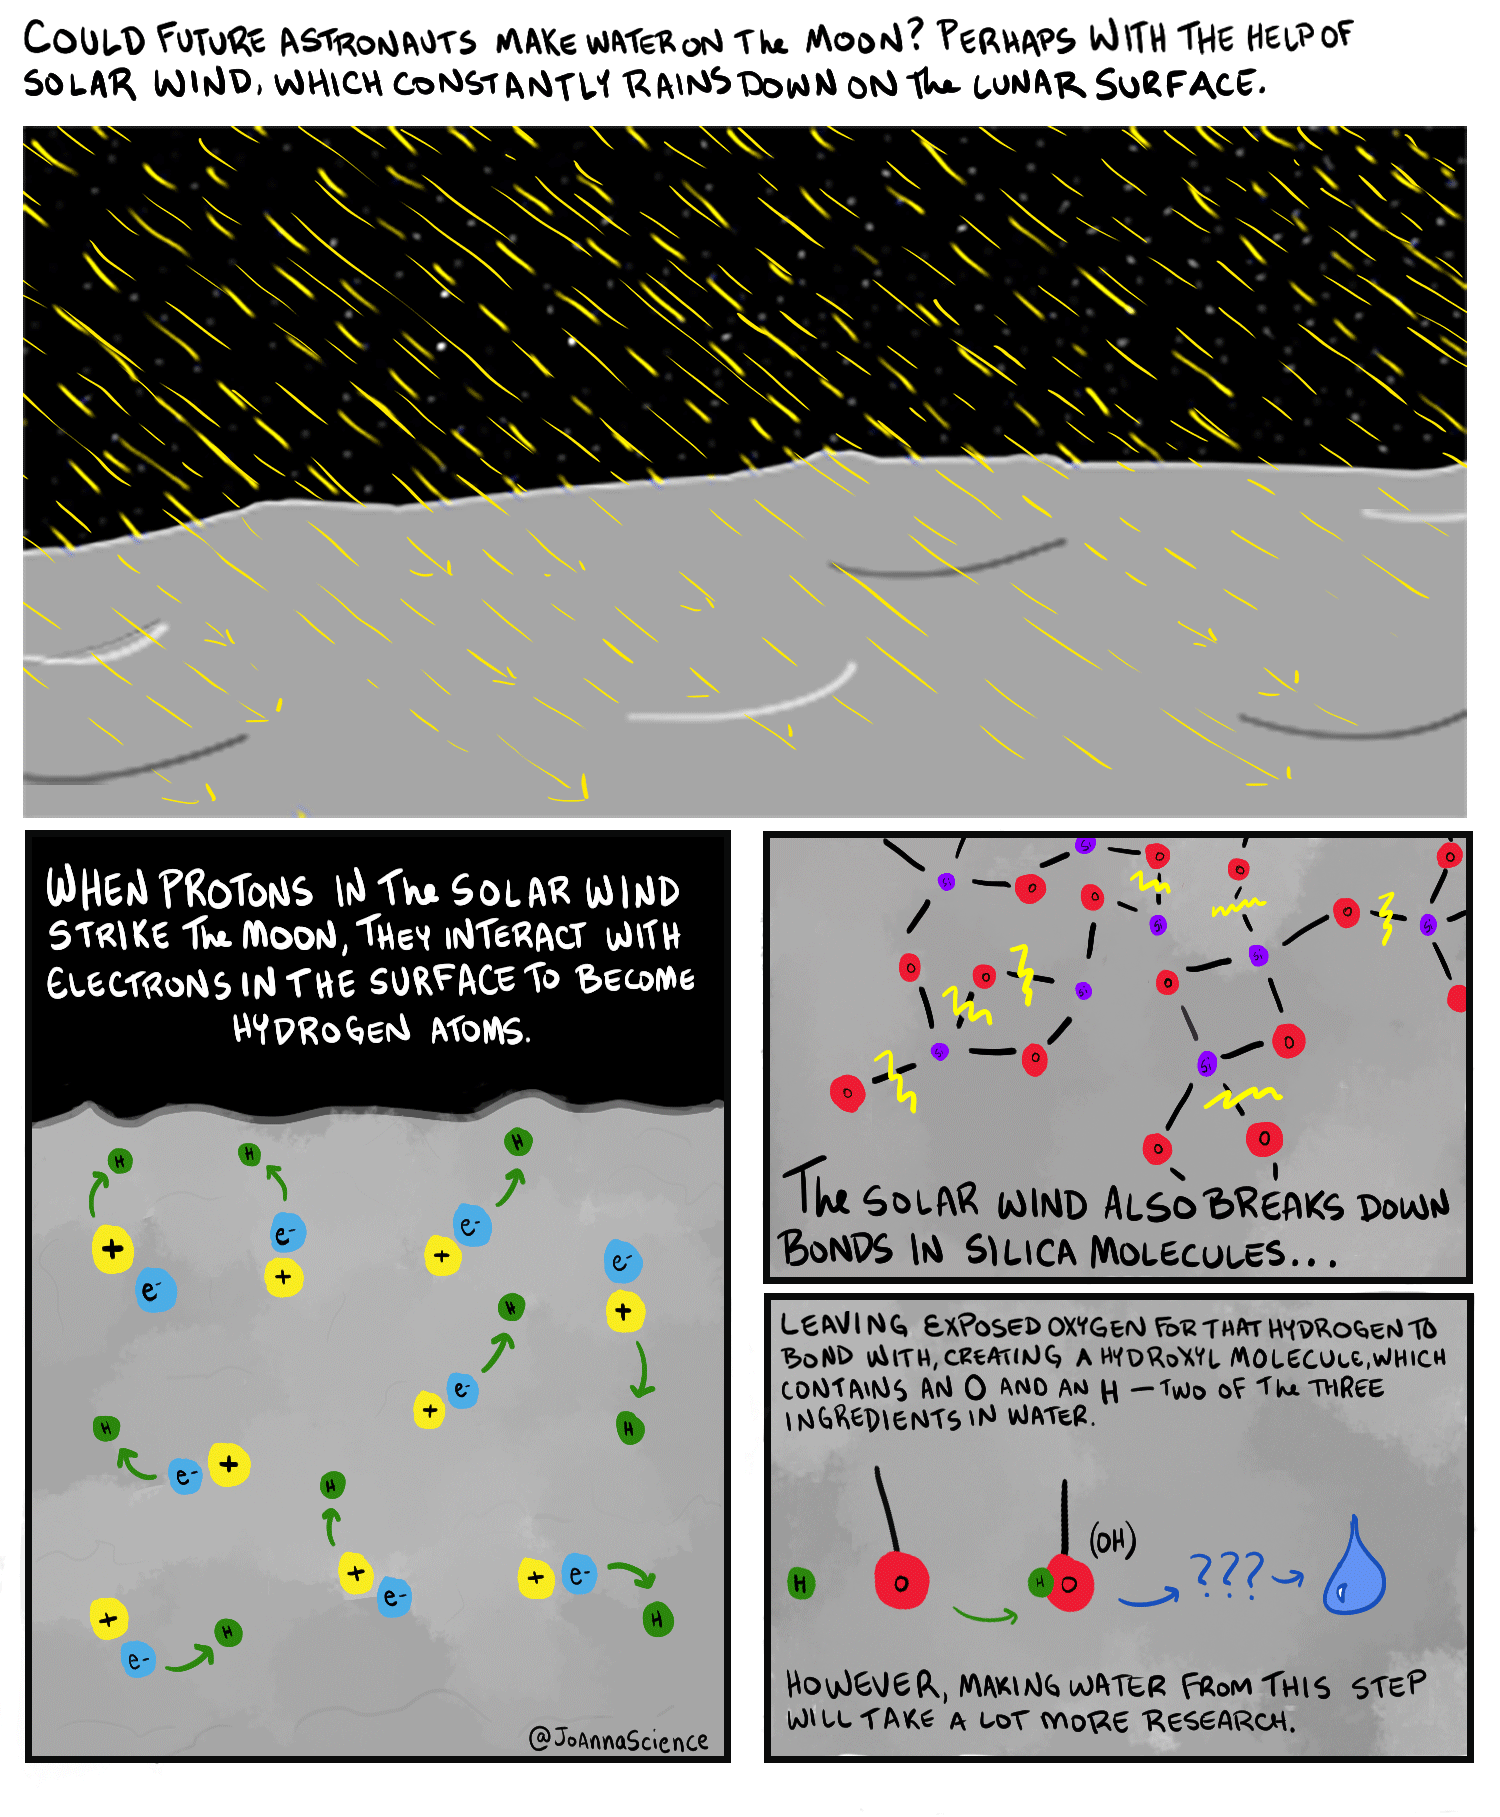 Comic about the chemistry unleashed by solar wind